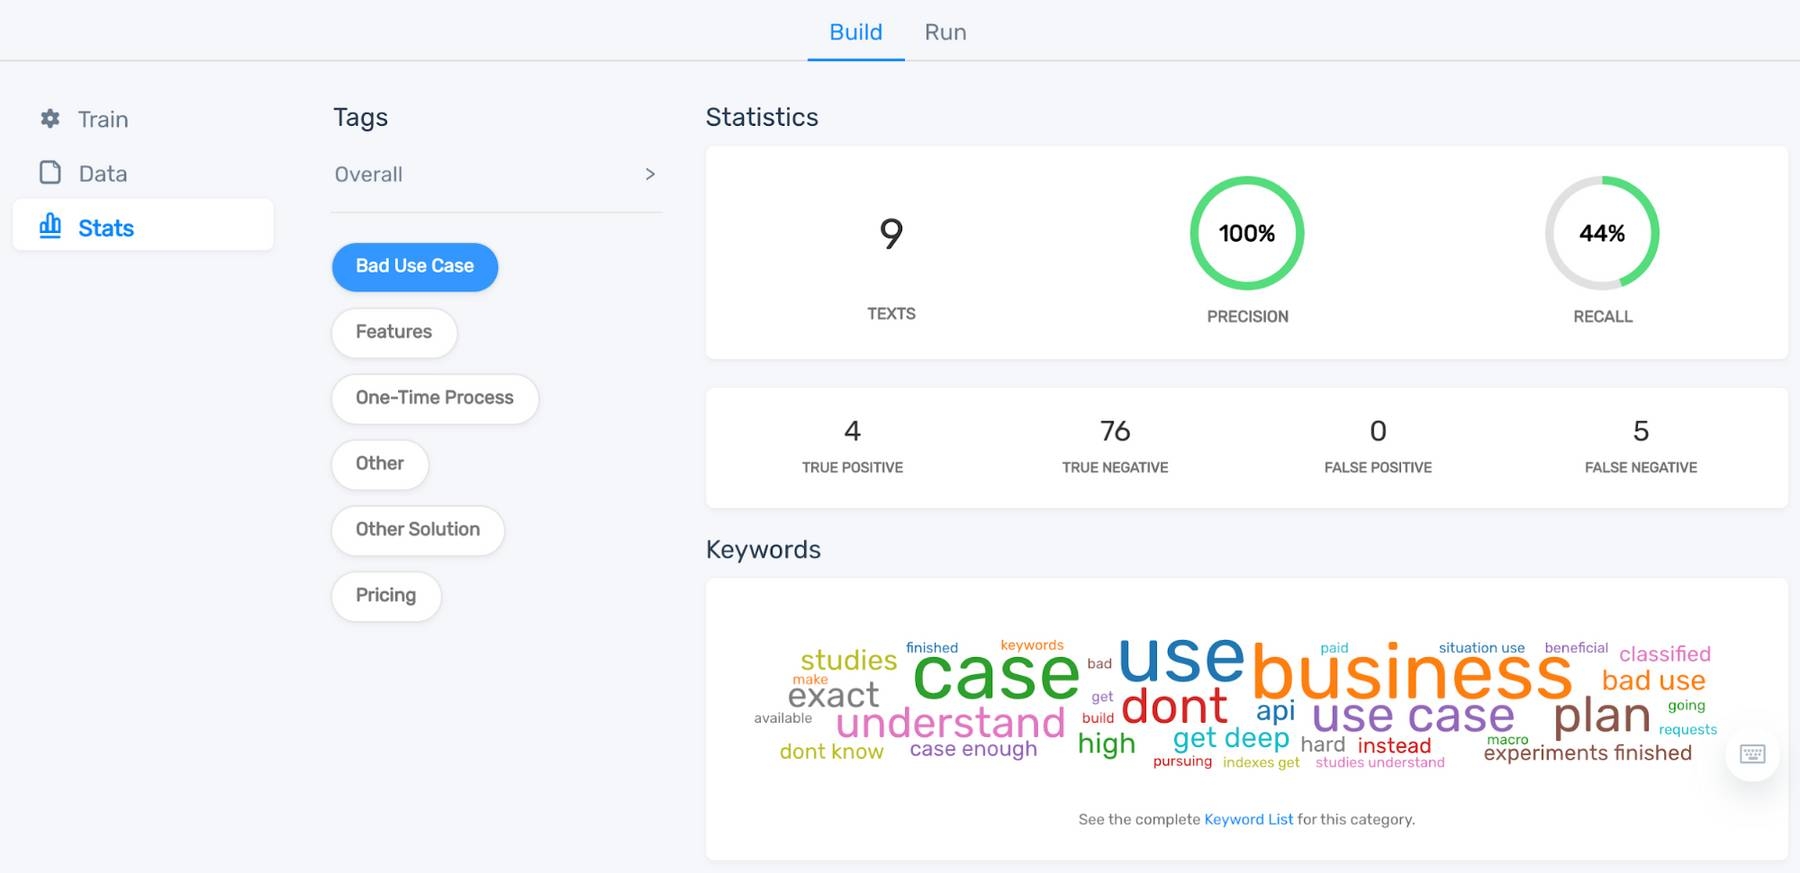 Dashboard showing statistics and keyword cloud for 'Bad Use Case.'